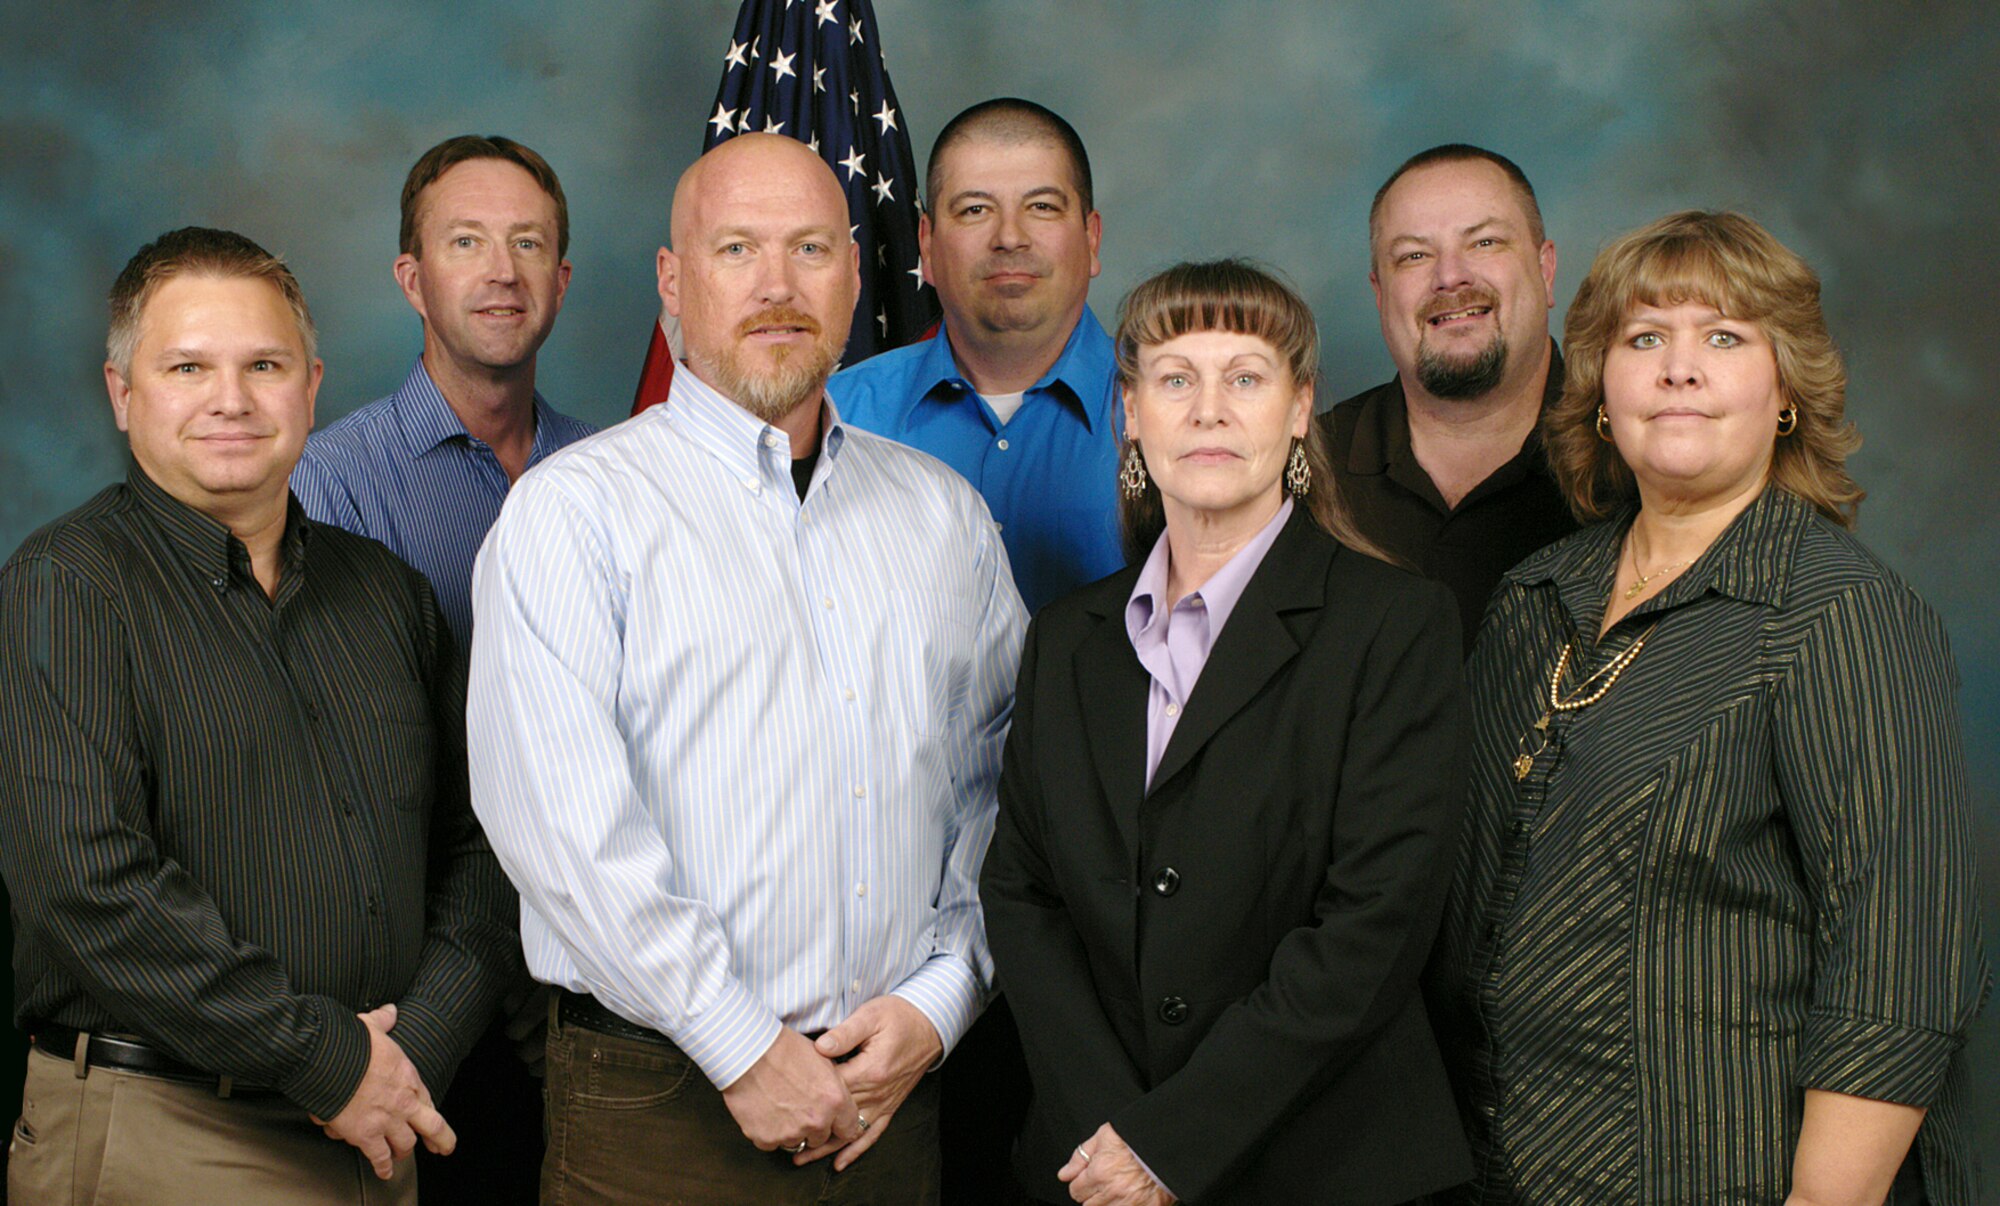 Air Force Research Laboratory’s safety office at Kirtland was recently named the best office of its kind in the Air Force. The office members, from left, are Jim Wilkinson, Mike Martin, Frank Wheatley, Cory Young, Karen George, Steve Sites, Cassie Ringham-Chavez. The member not pictured is Kea Anderson. (Courtesy photo)